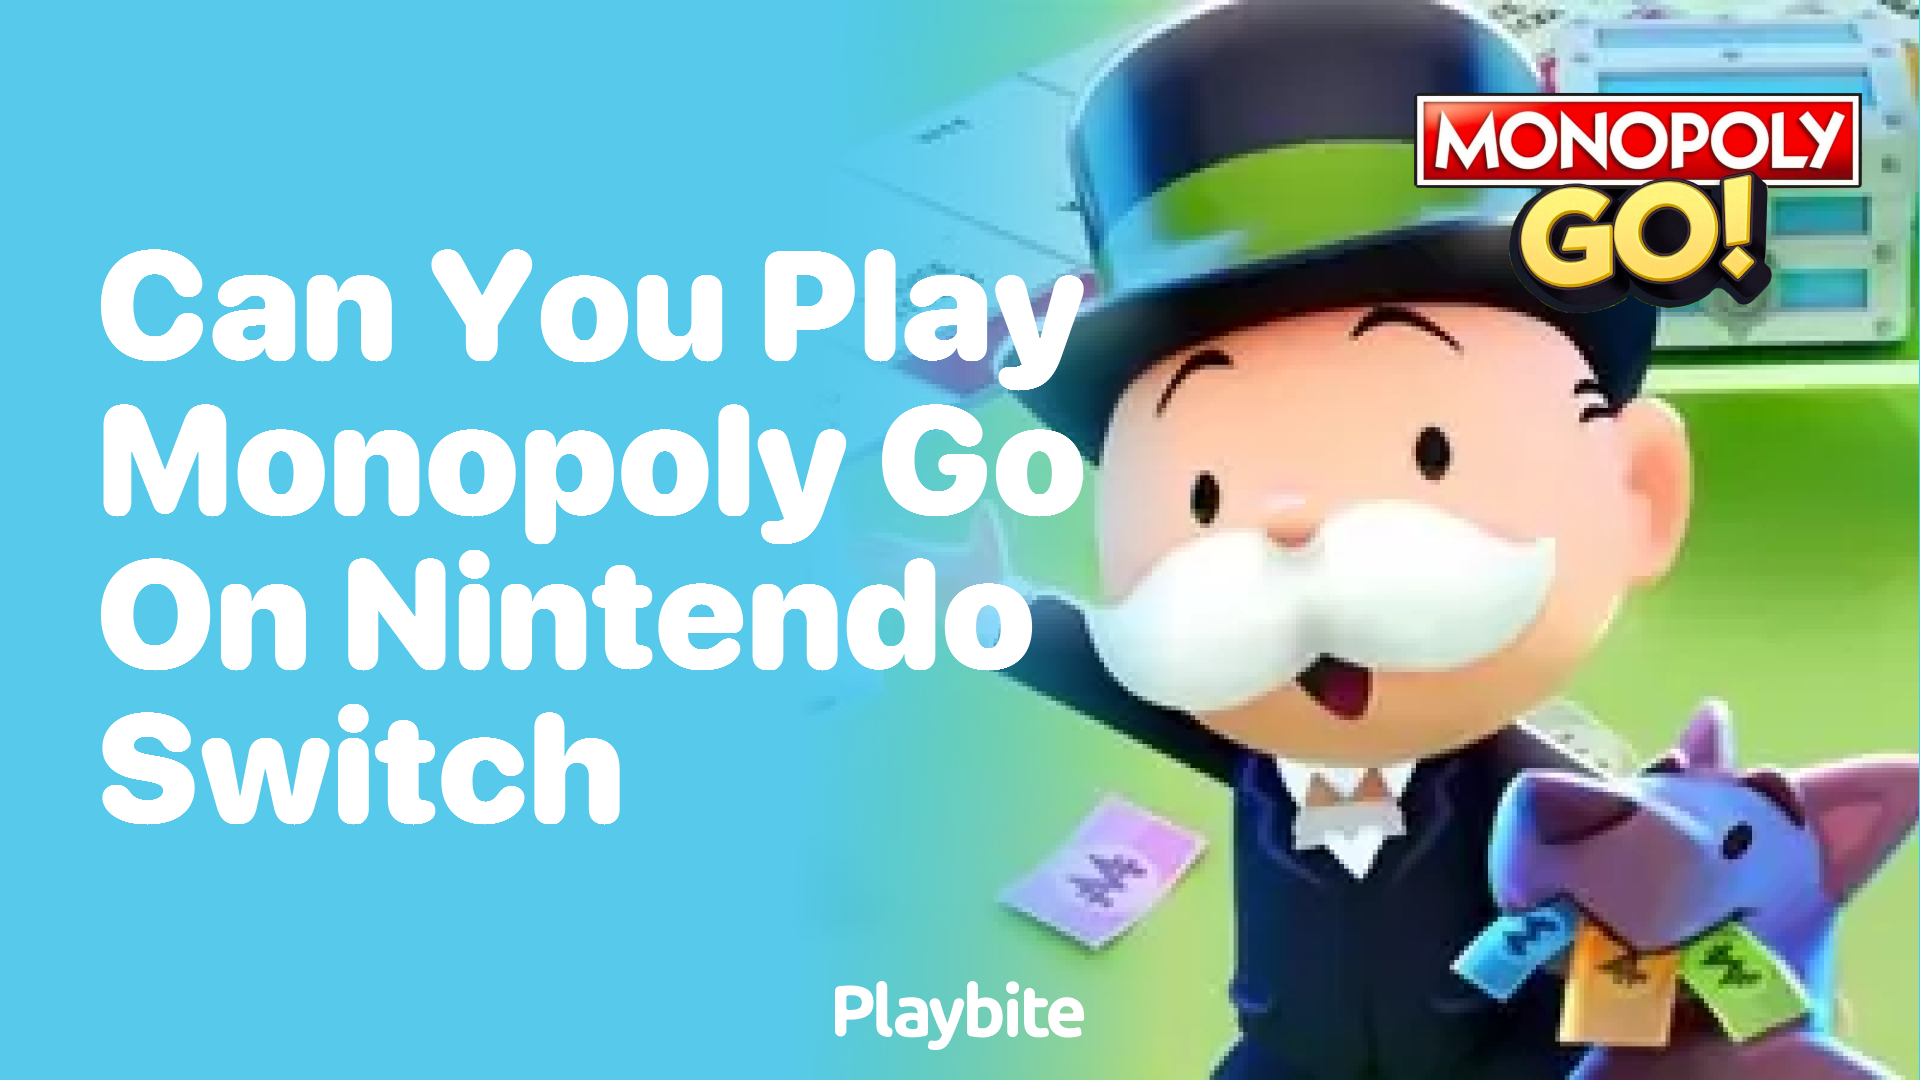 Can You Play Monopoly Go on Nintendo Switch?